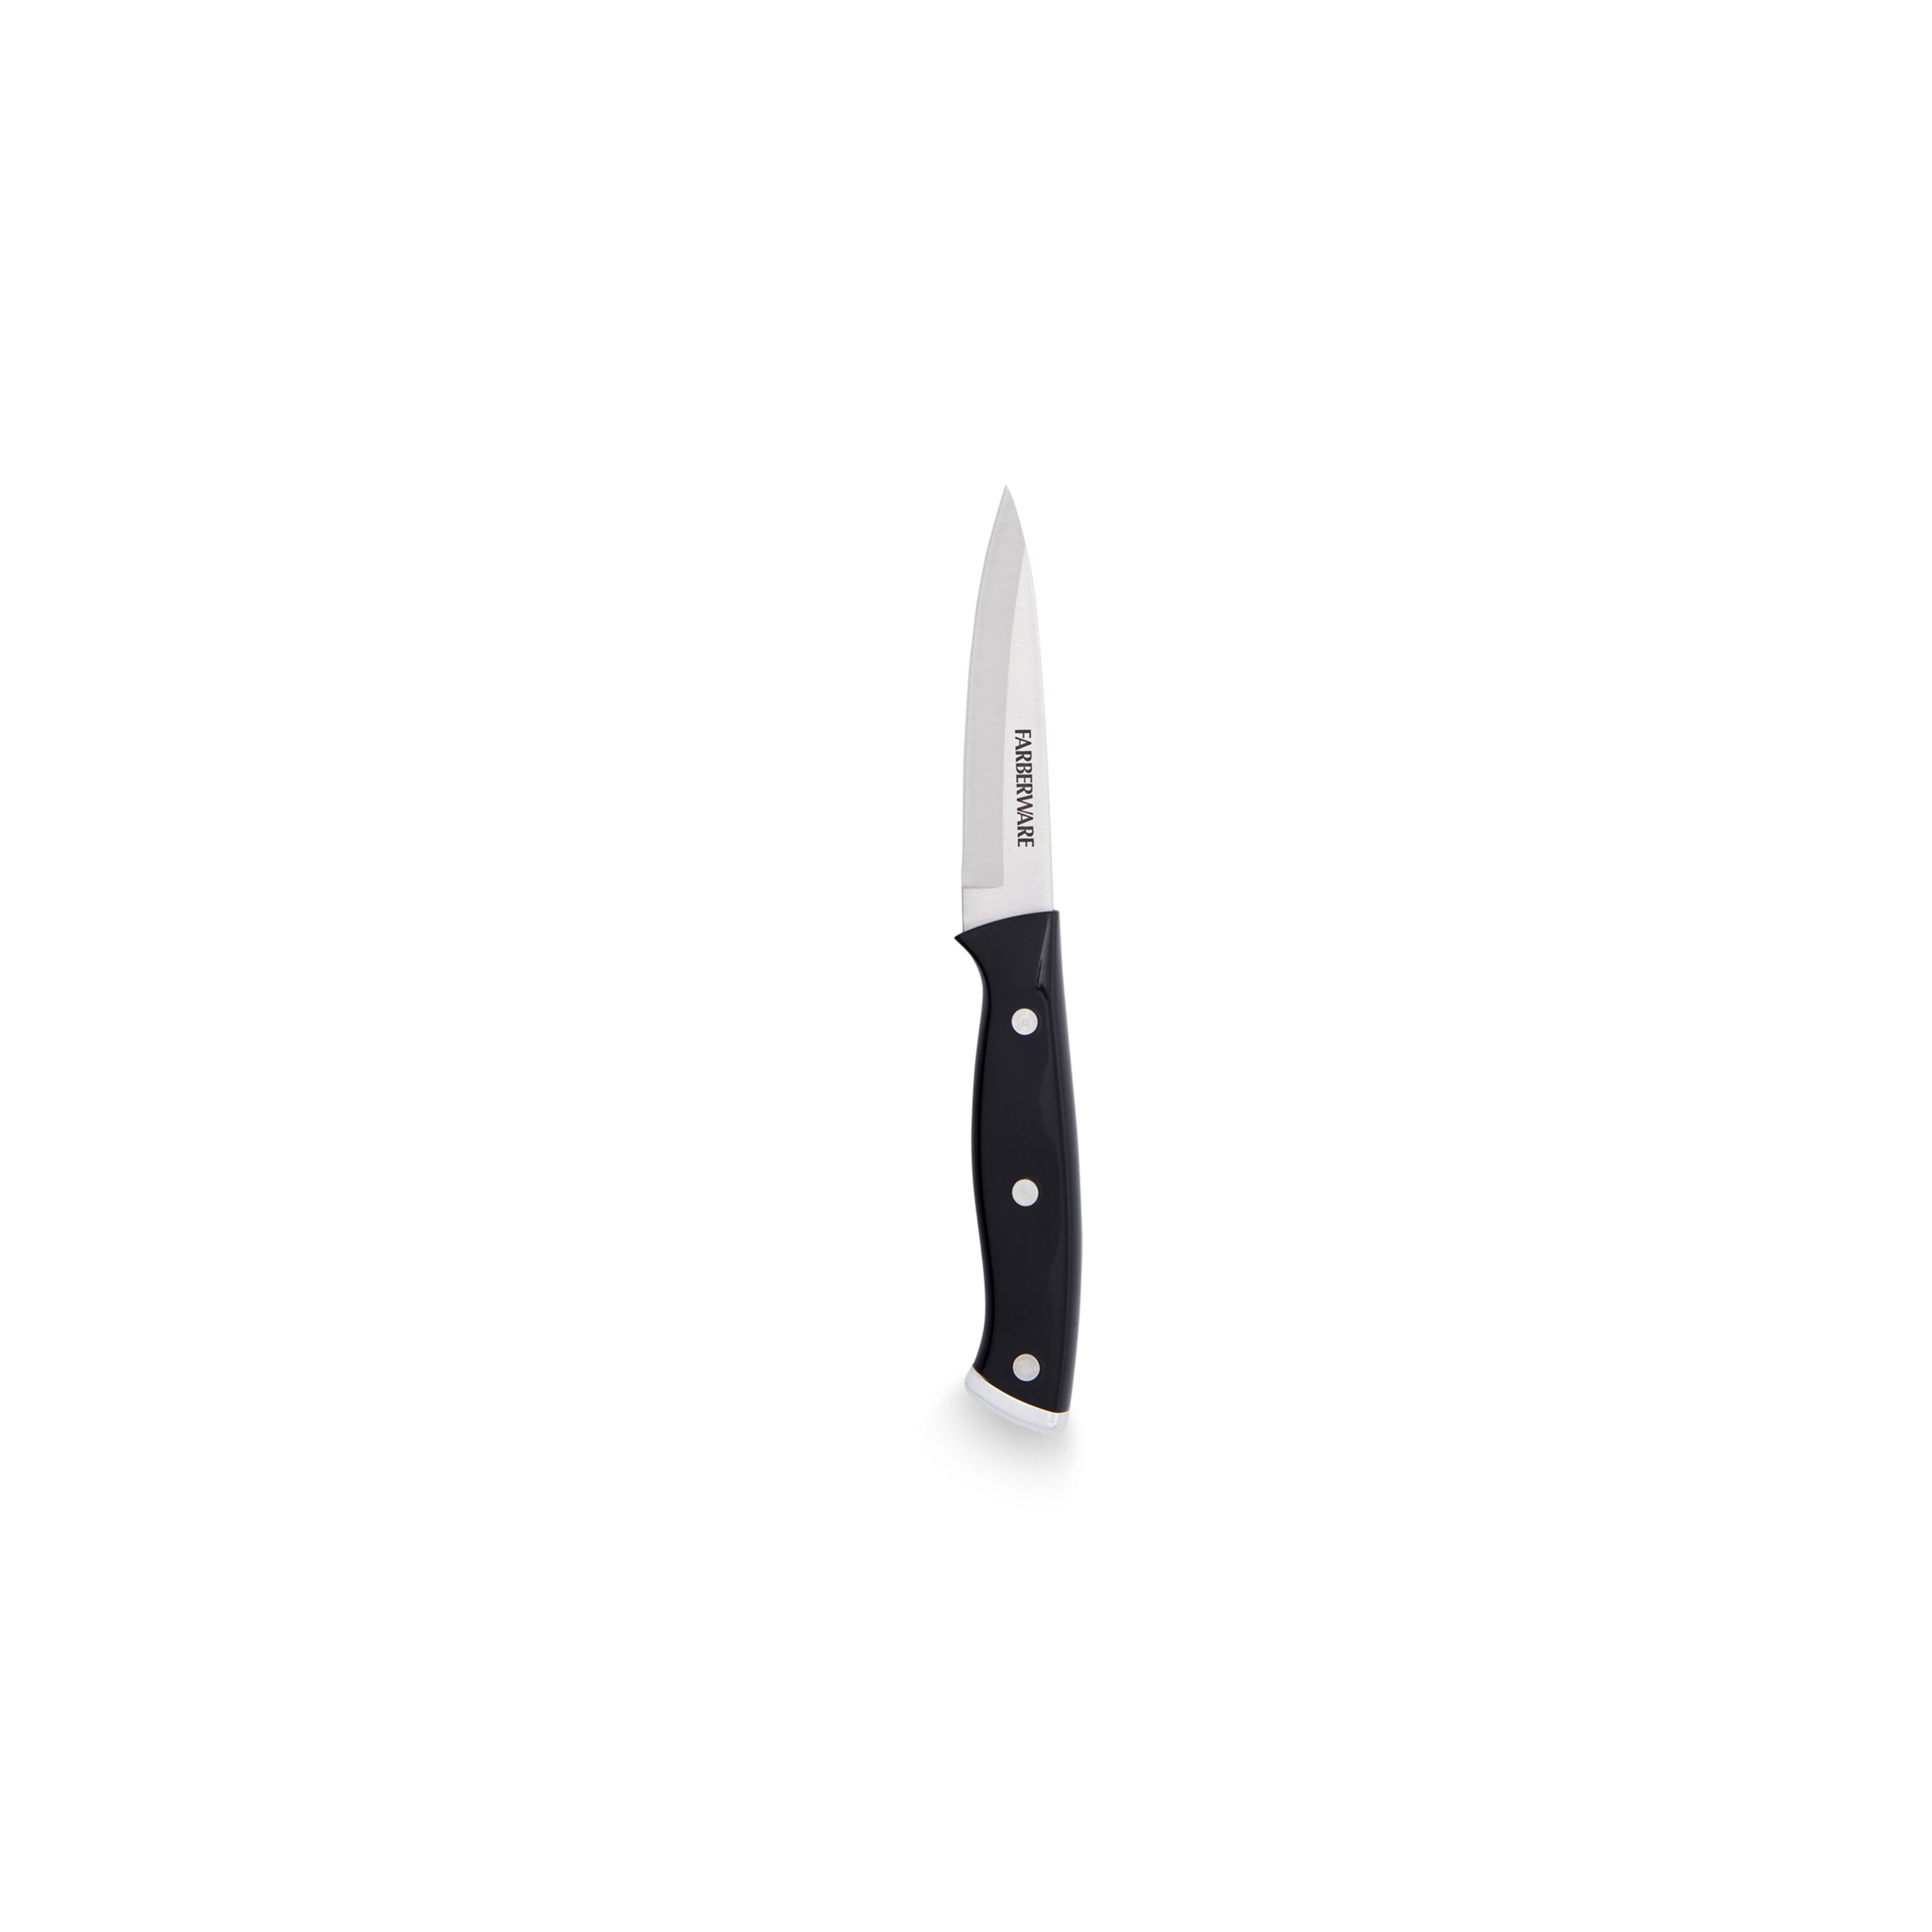 Farberware 3-Piece Stainless Steel Chef Knife Set - 5152511